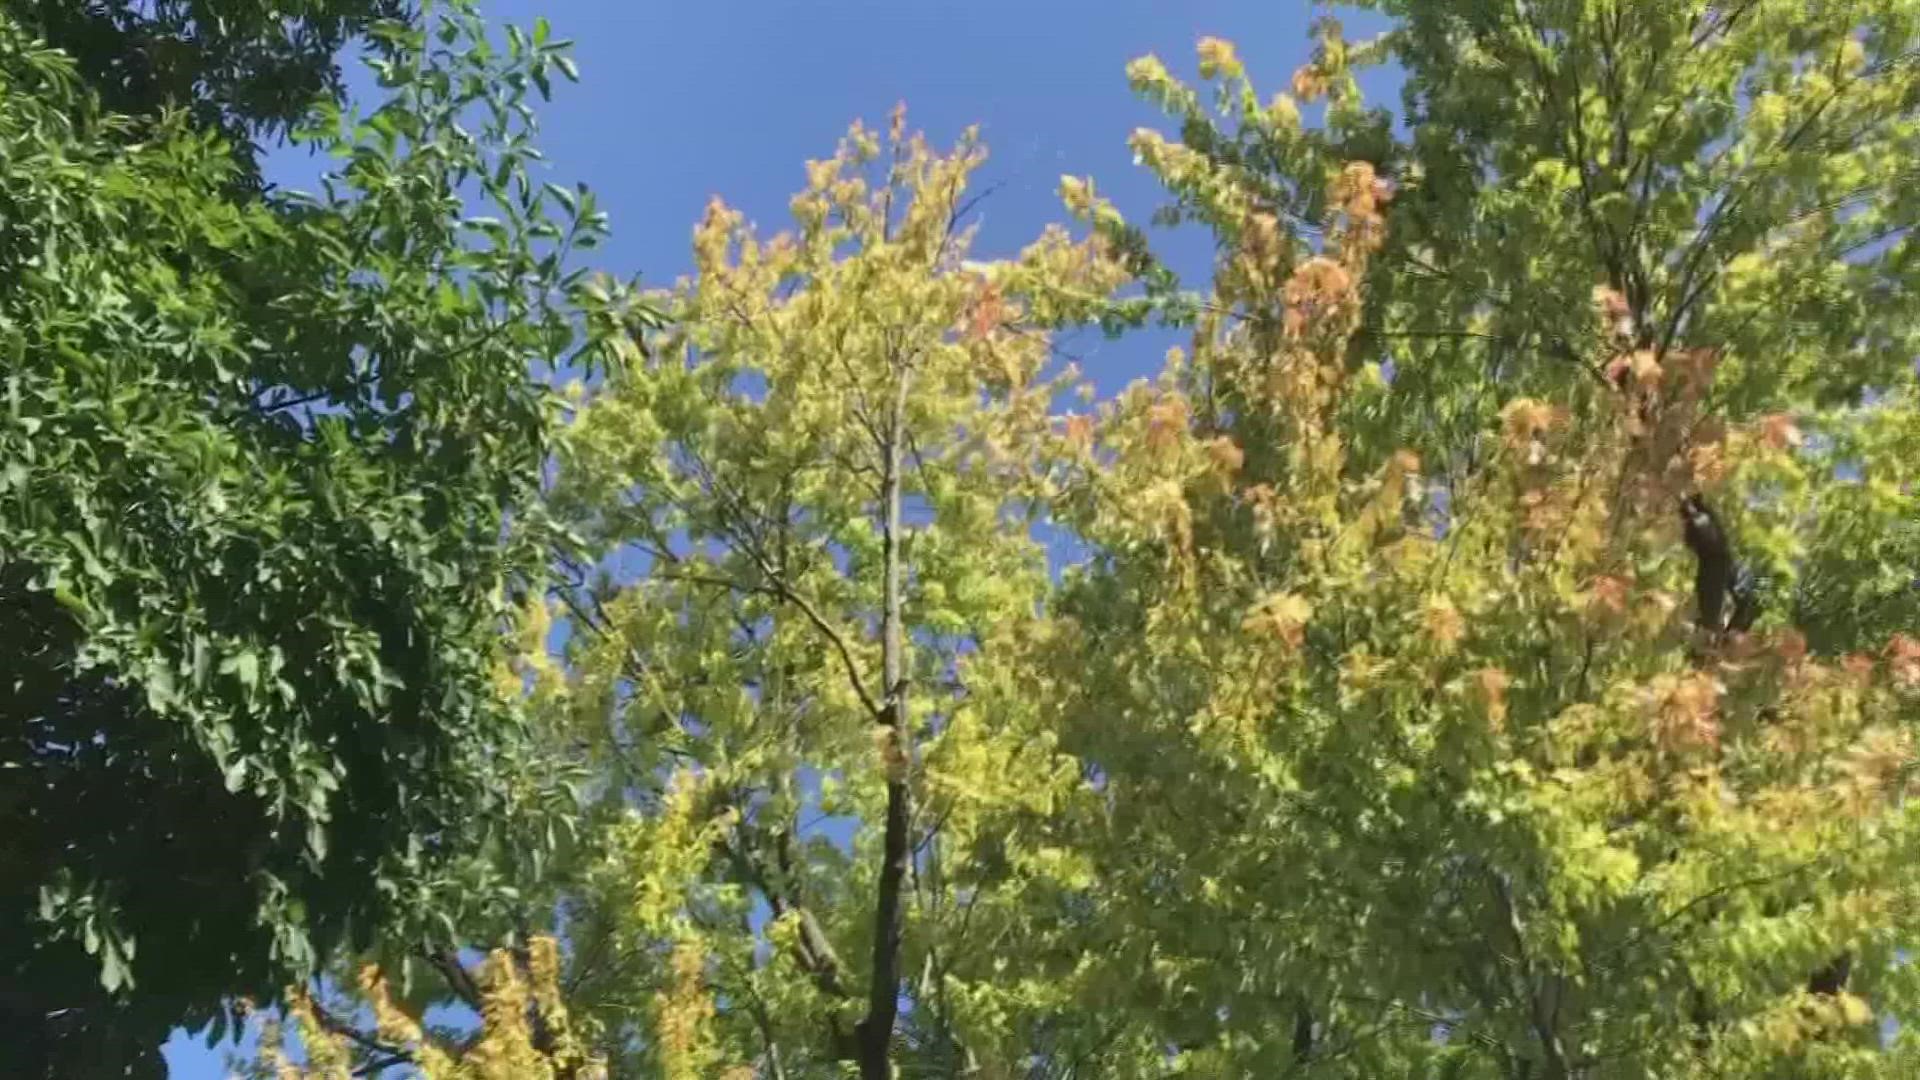 This year’s fall foliage will be patchy compared to last year.